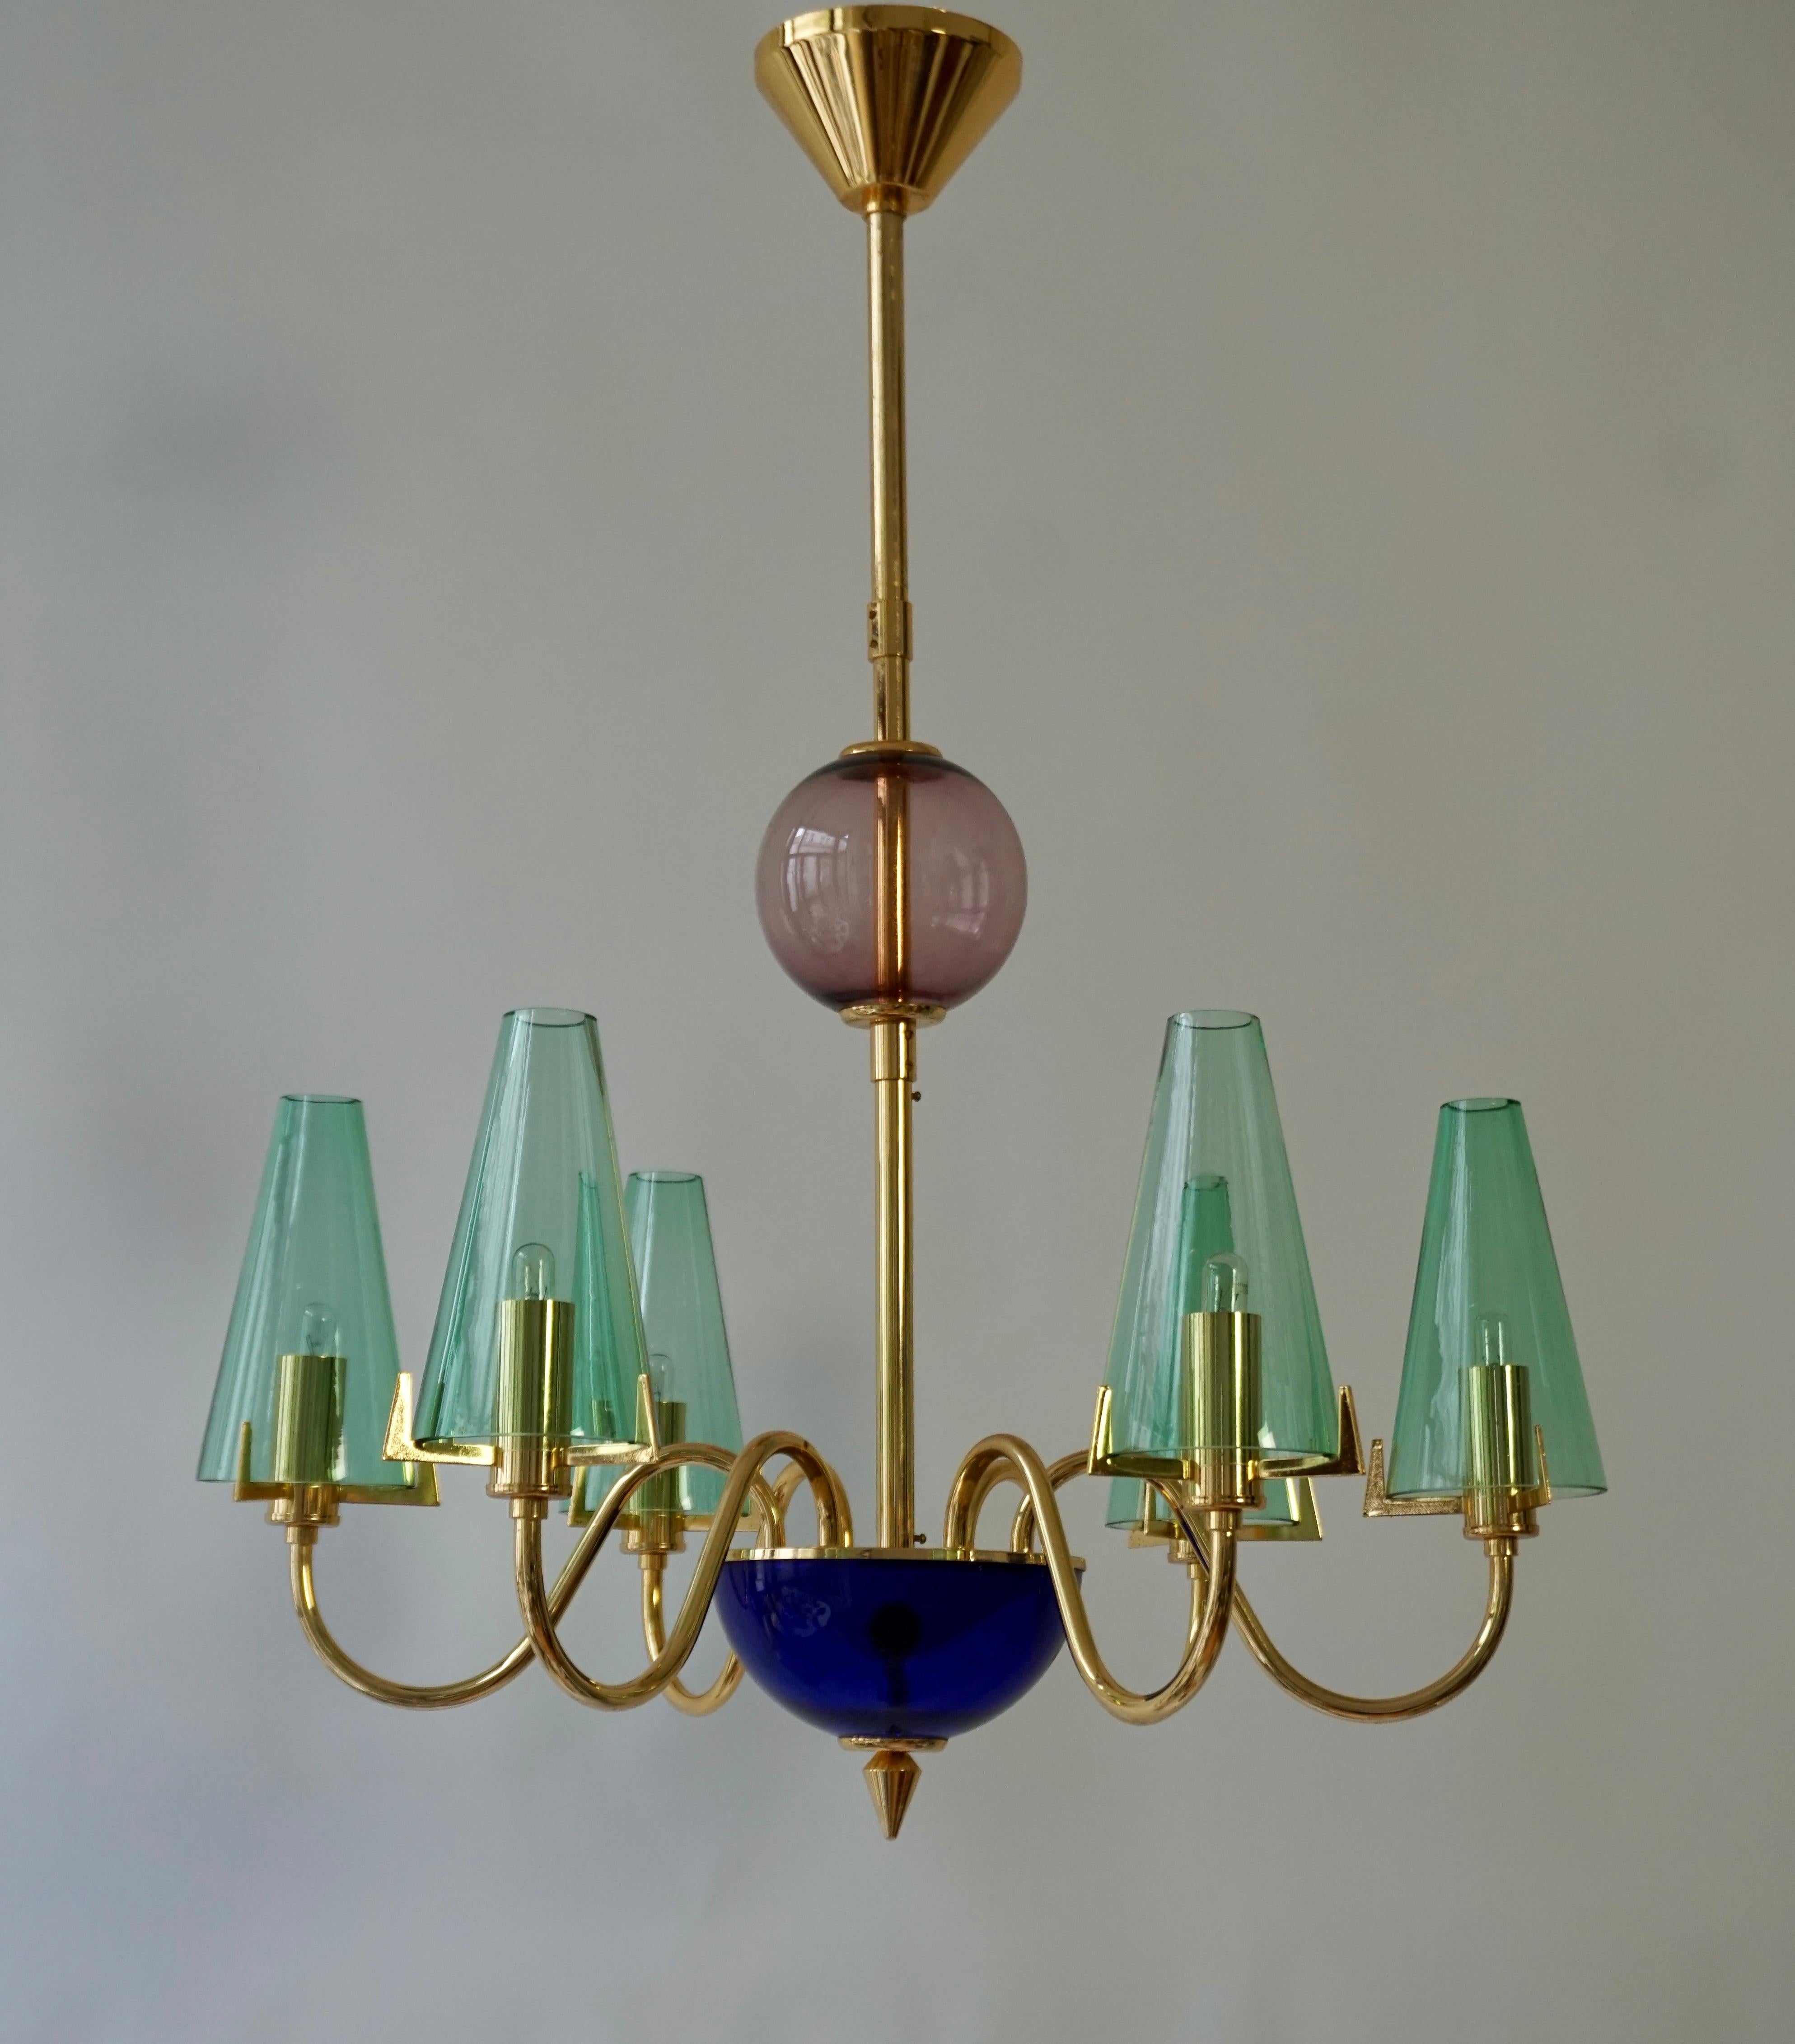 Italian Murano glass chandelier by F. Fabbian.

A 1960s Ceiling Light 'Model C03A0943', by F. Fabbian, Italy, brass with colored glass shades and detailing in green blue and purple.

Dimensions:
Diameter: 60 cm - 23.6